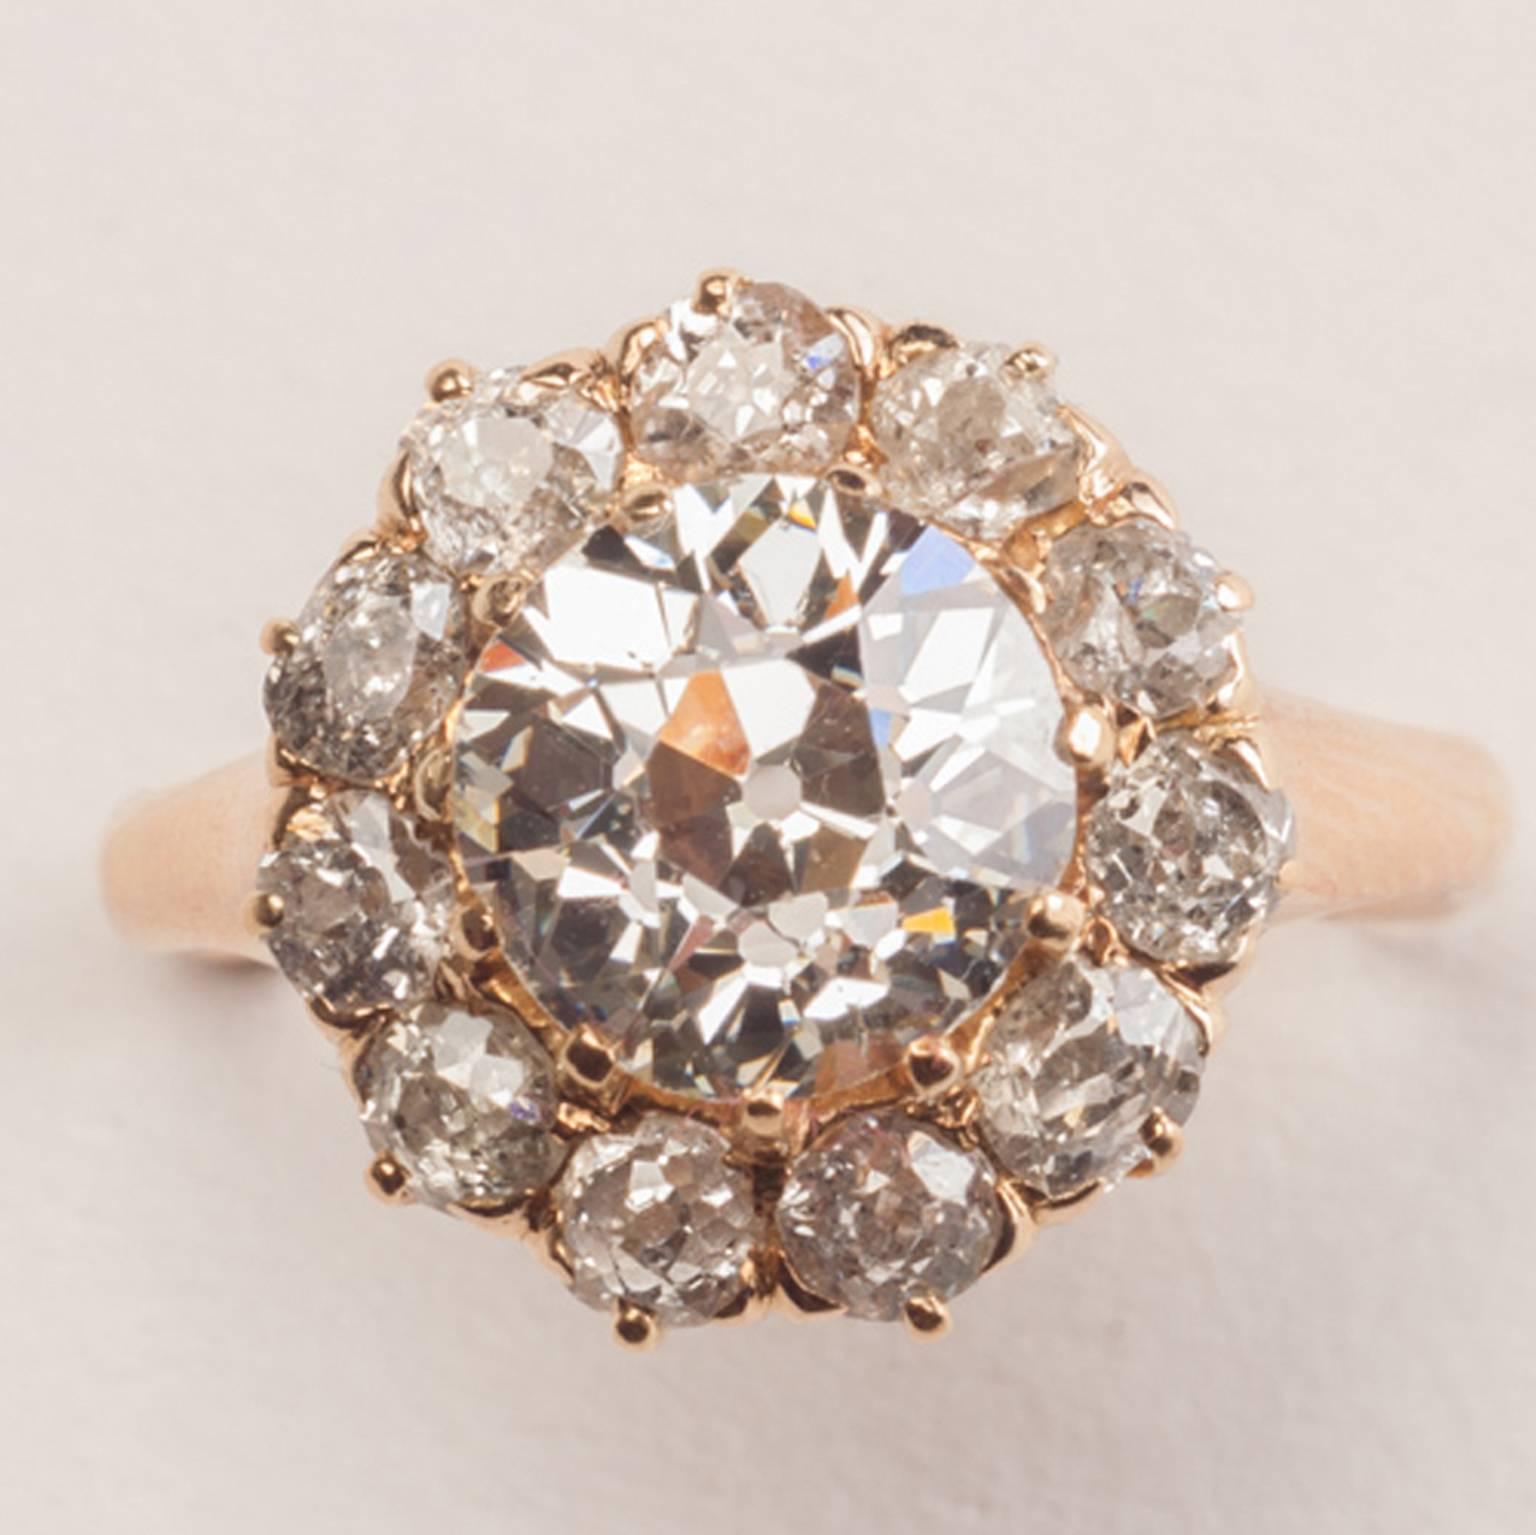 An 18 carat warm yellow gold cluster ring centering an old cut diamond (1.65 carats, G-H, VS) with an old cut diamond entourage (app. 0.65 carats in total, total 2.3 carats), 19th century.

weight: 3.31 grams
ring size: 16.25 mm but easily sizeable